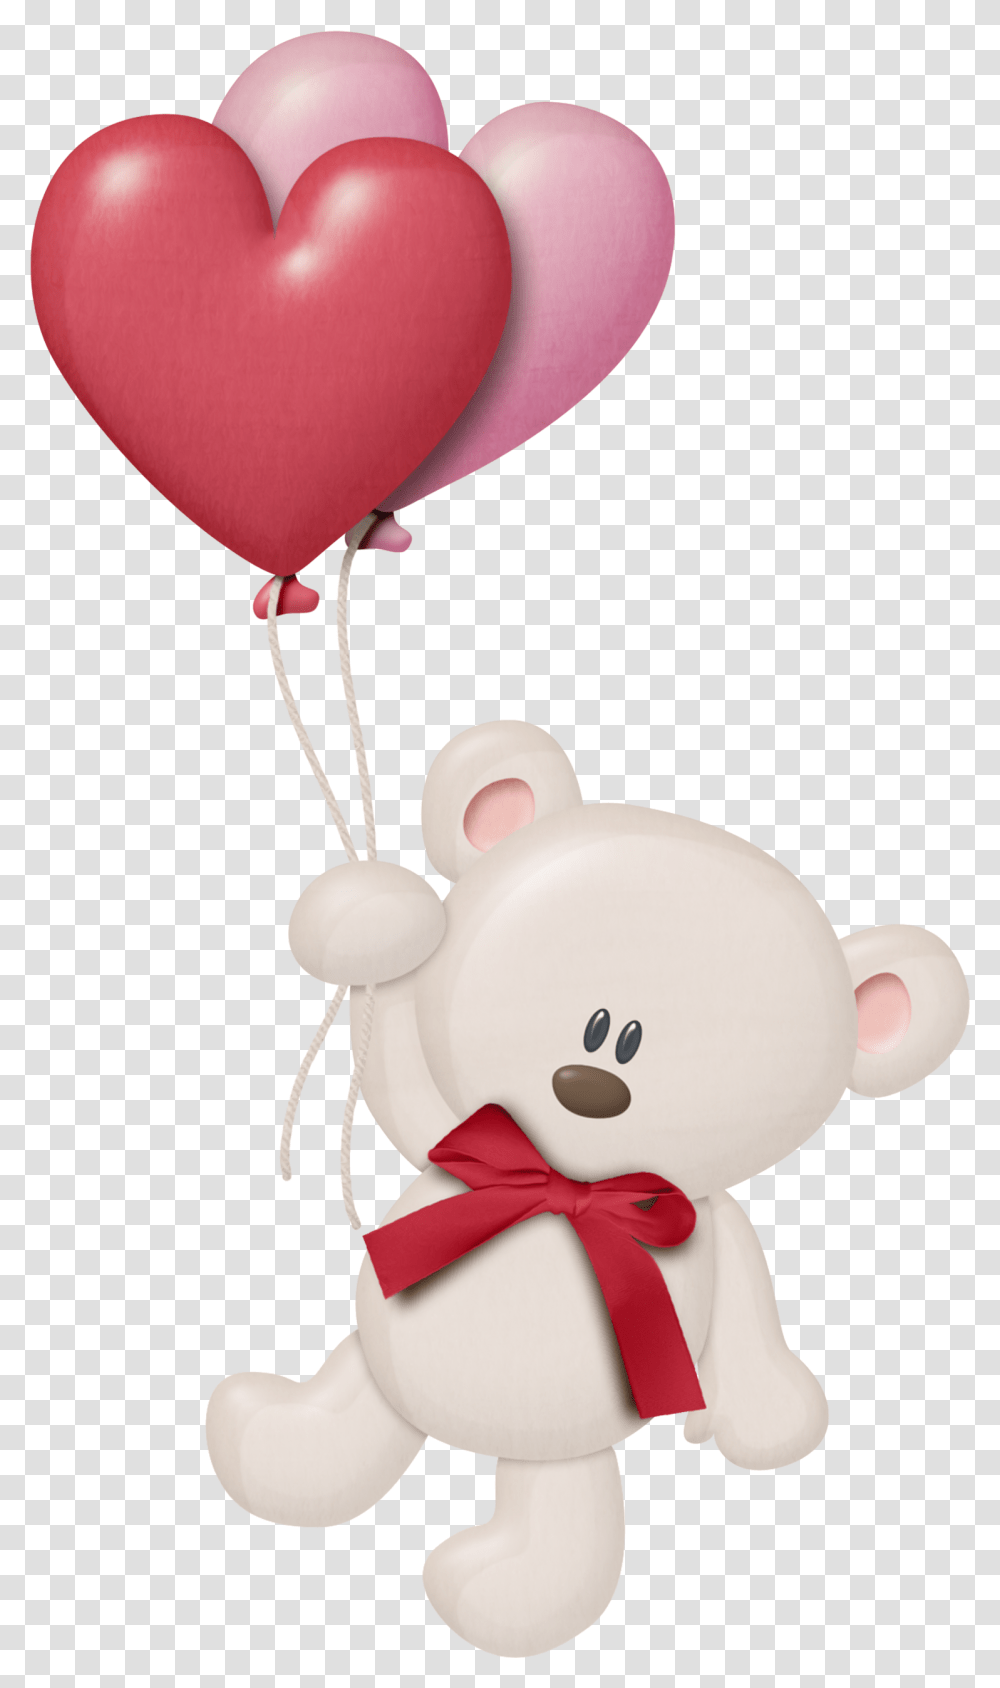 Teddy Bear With Heart Balloons Download Heart Birthday Balloon Transparent Png